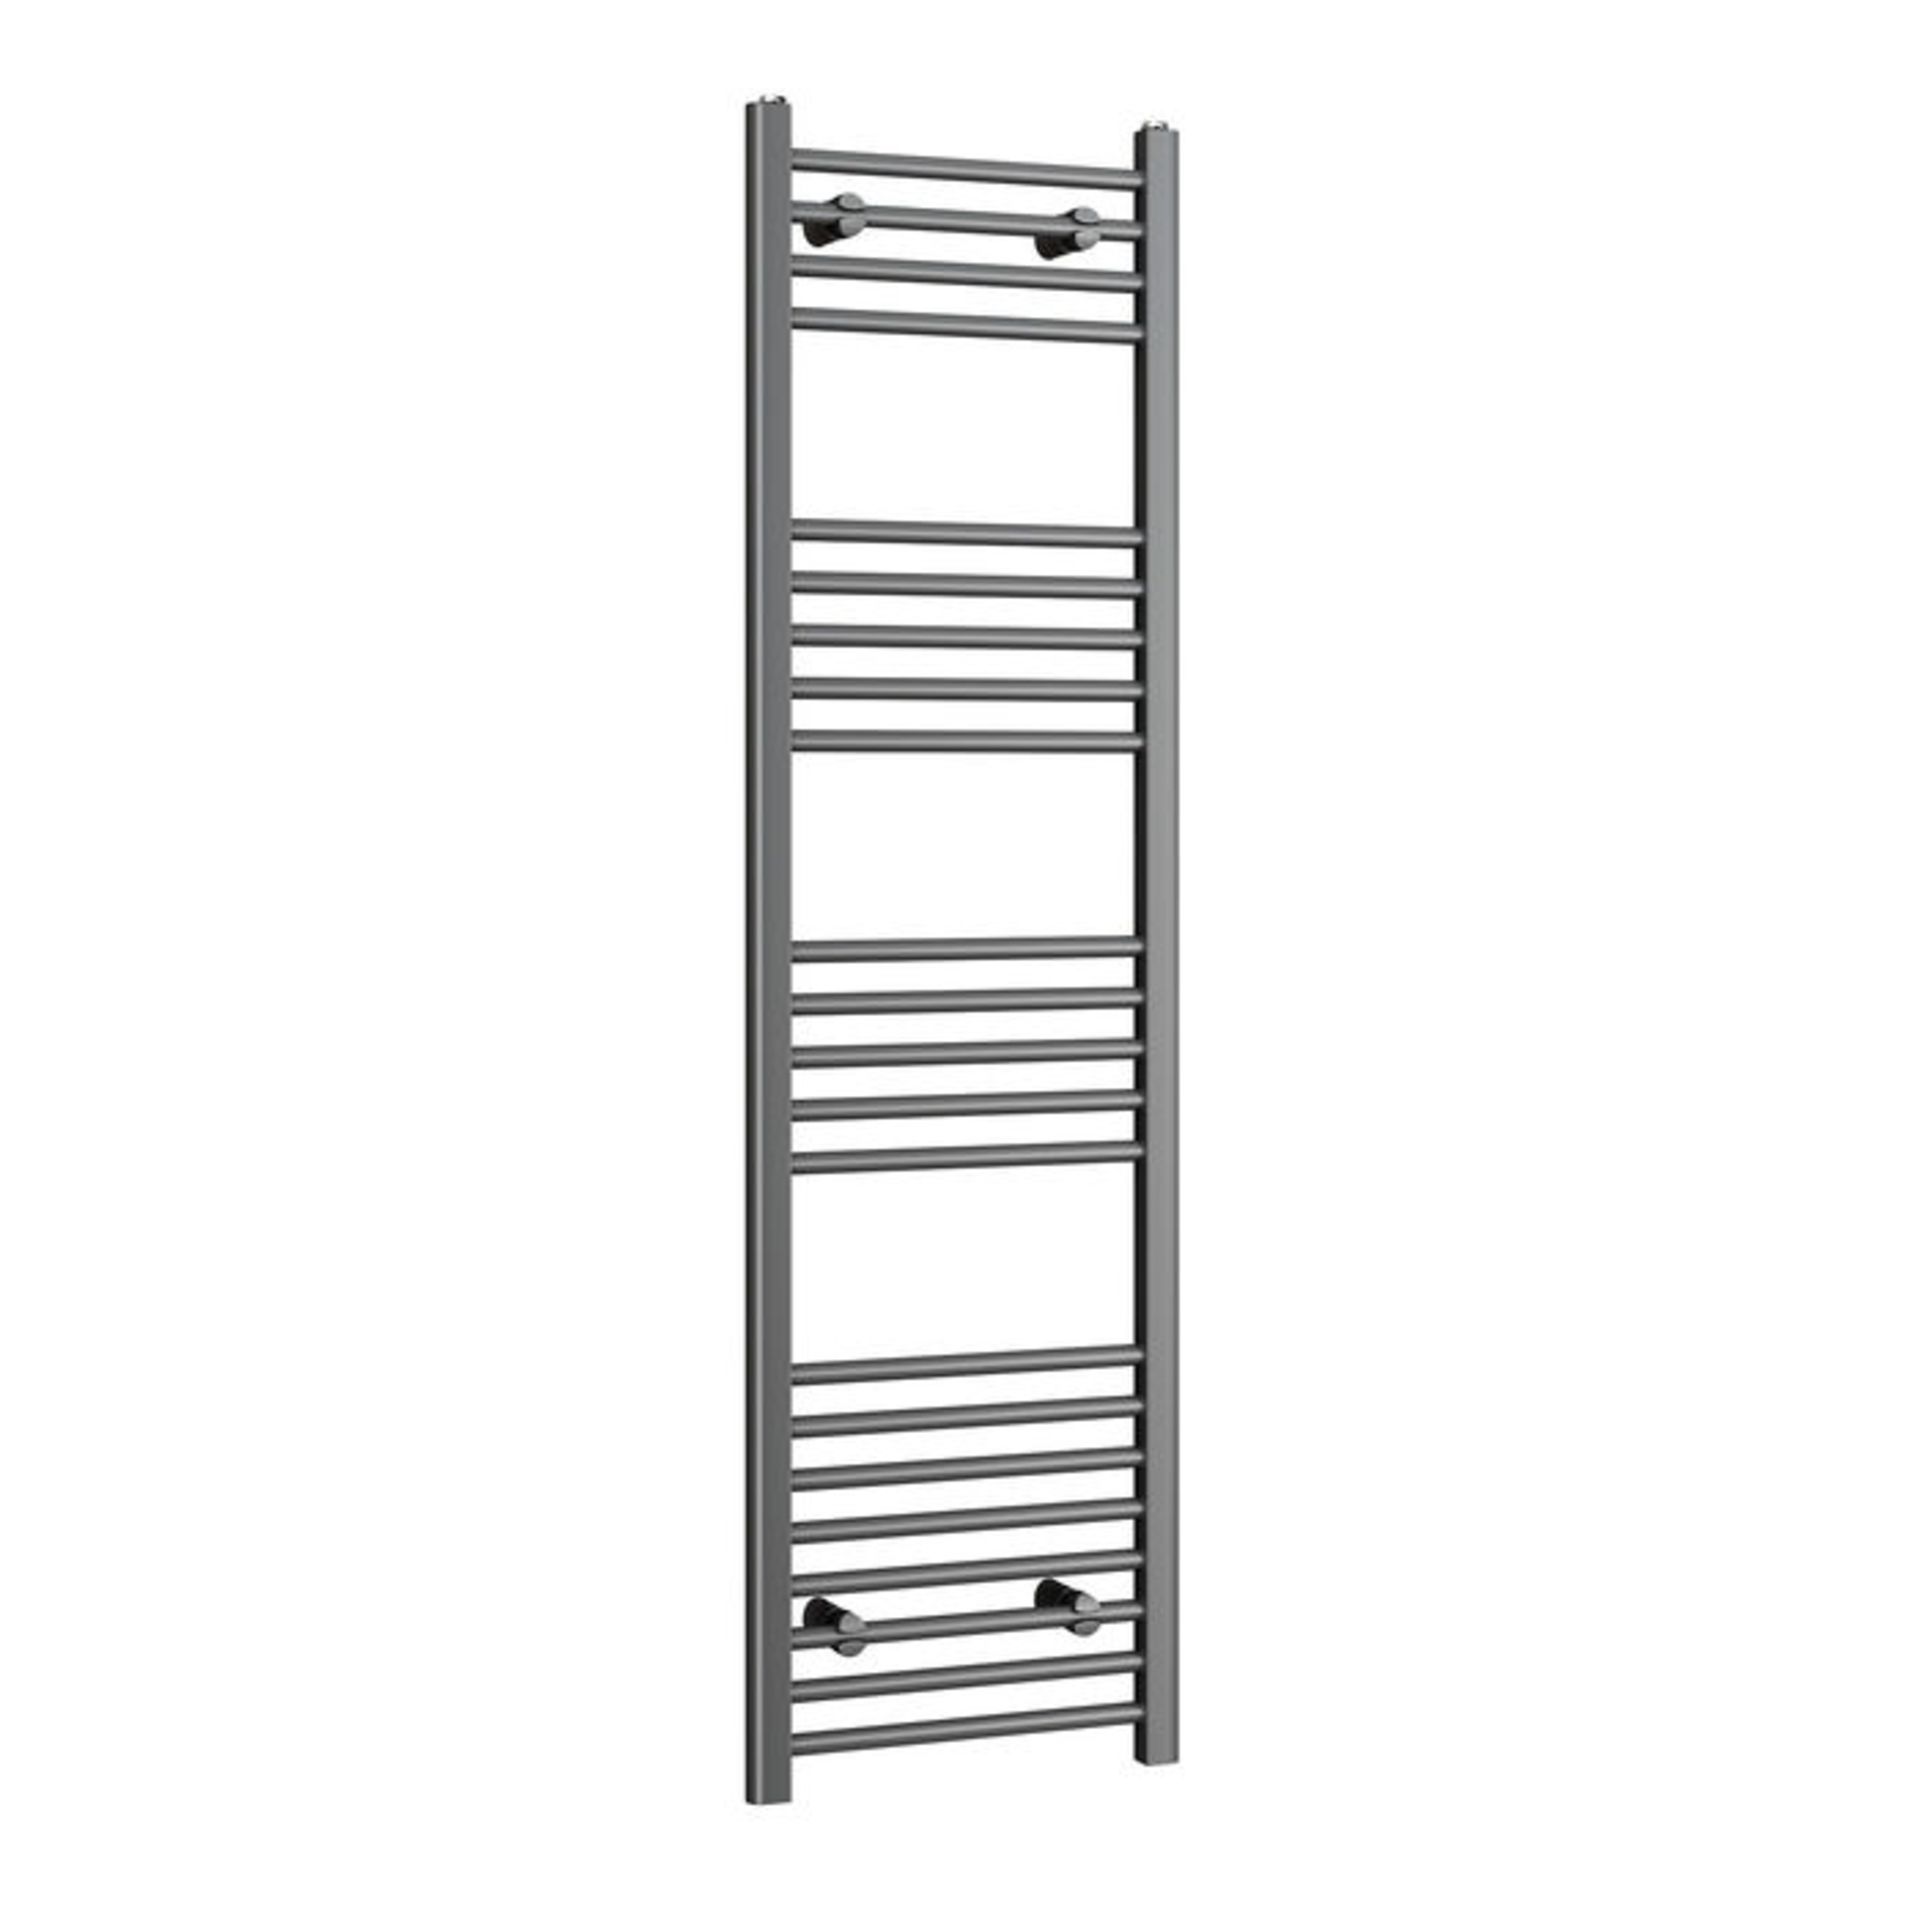 (AD259) 1800x400mm - 20mm Tubes - Anthracite Heated Straight Rail Ladder Towel Radiator. RRP £209. - Image 3 of 4